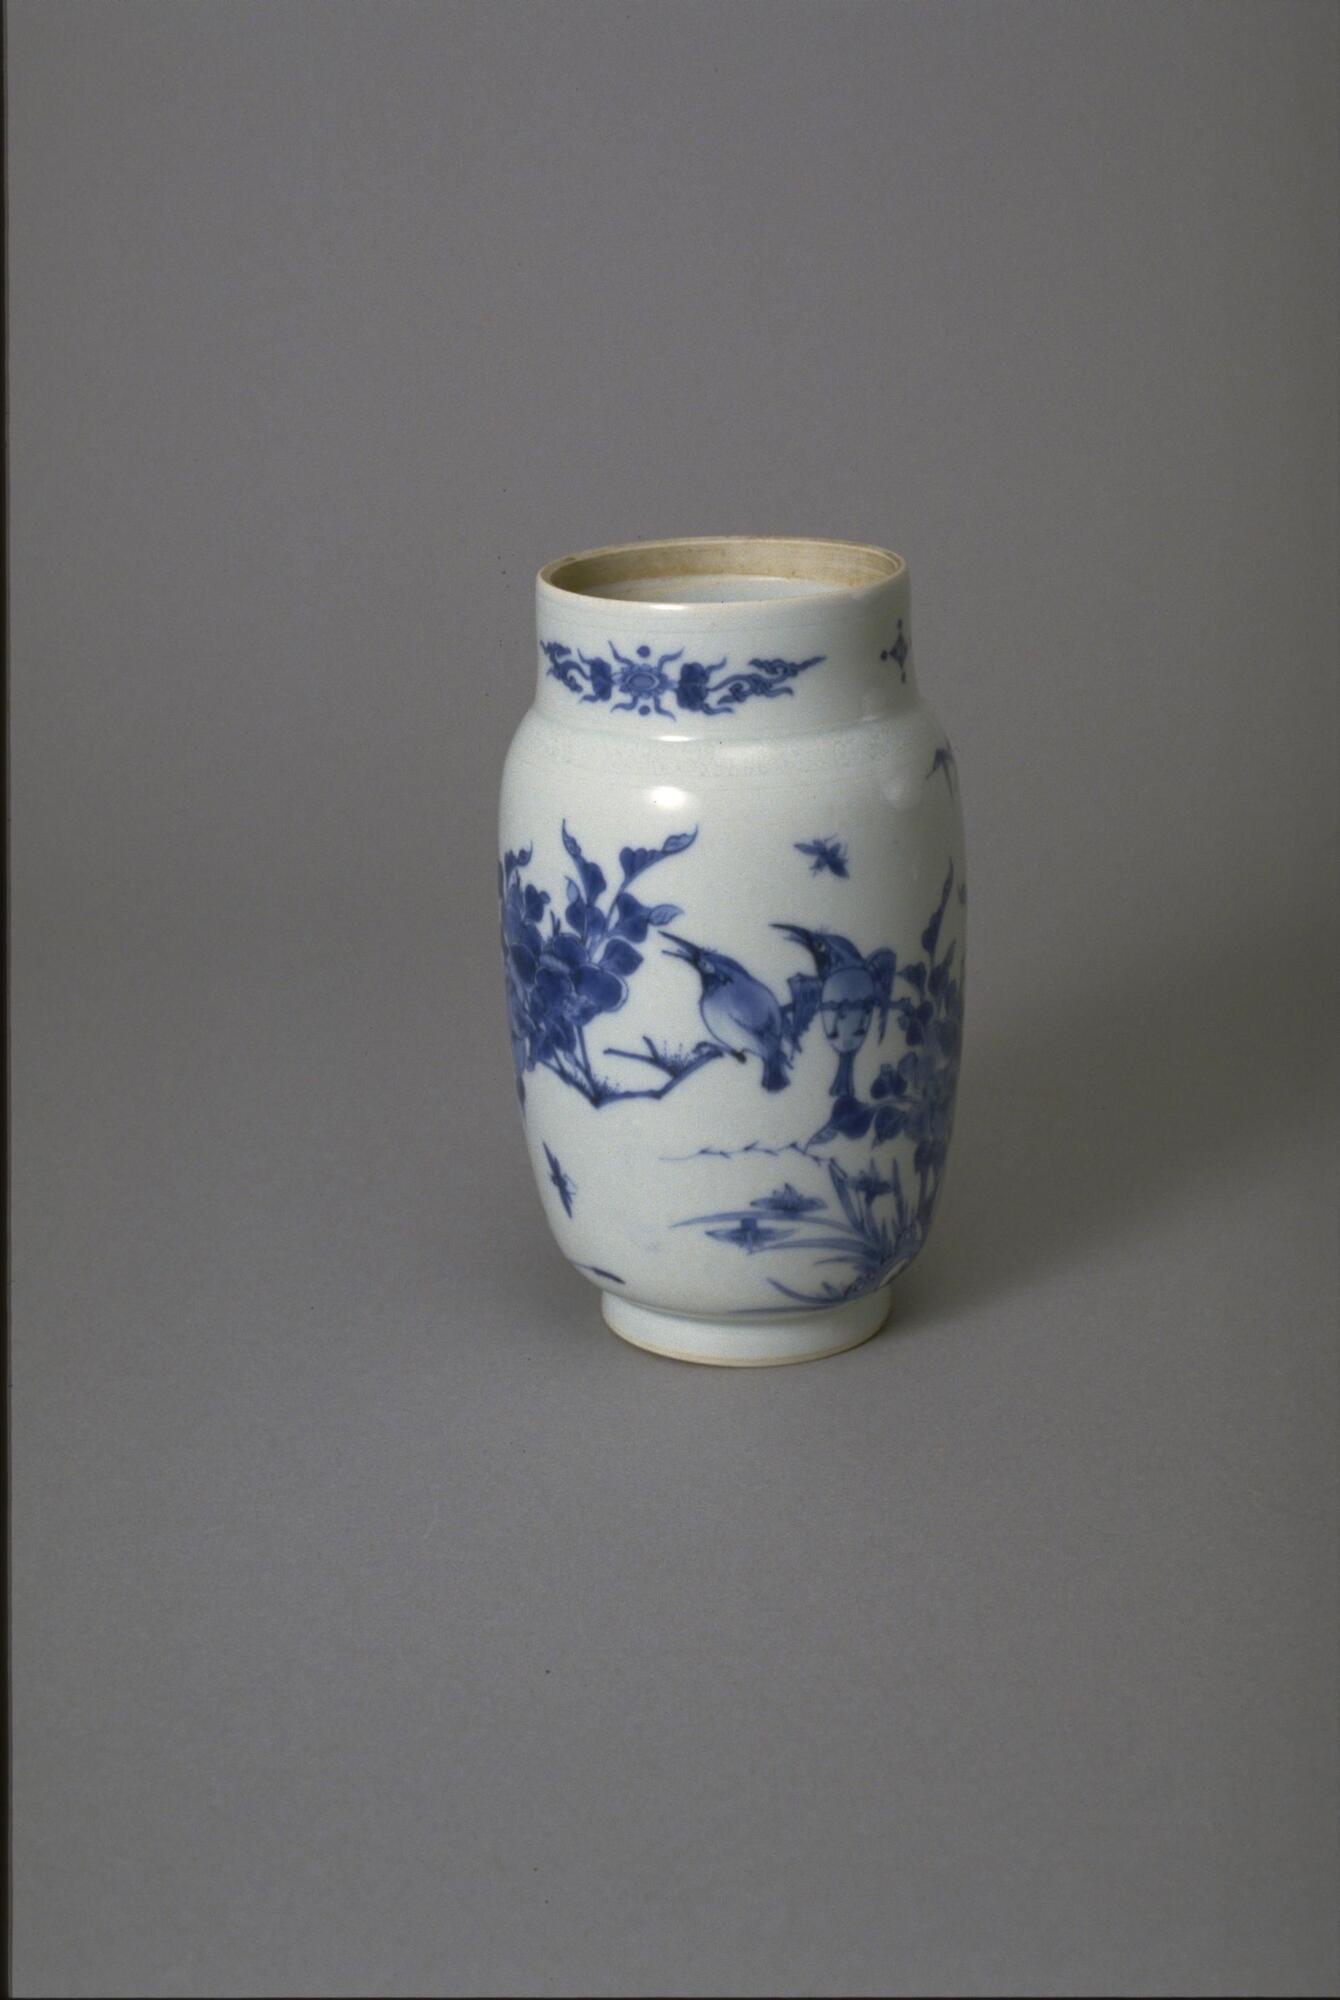 This porcelain jar with cylindrical body, has a recessed neck and foot with the same diameter. The body is decorated with underglaze blue paintings of magpies, plum branches, and bamboo, with floral scrolls around neck. The jar is covered with a clear glaze and is missing the dome capped lid. 